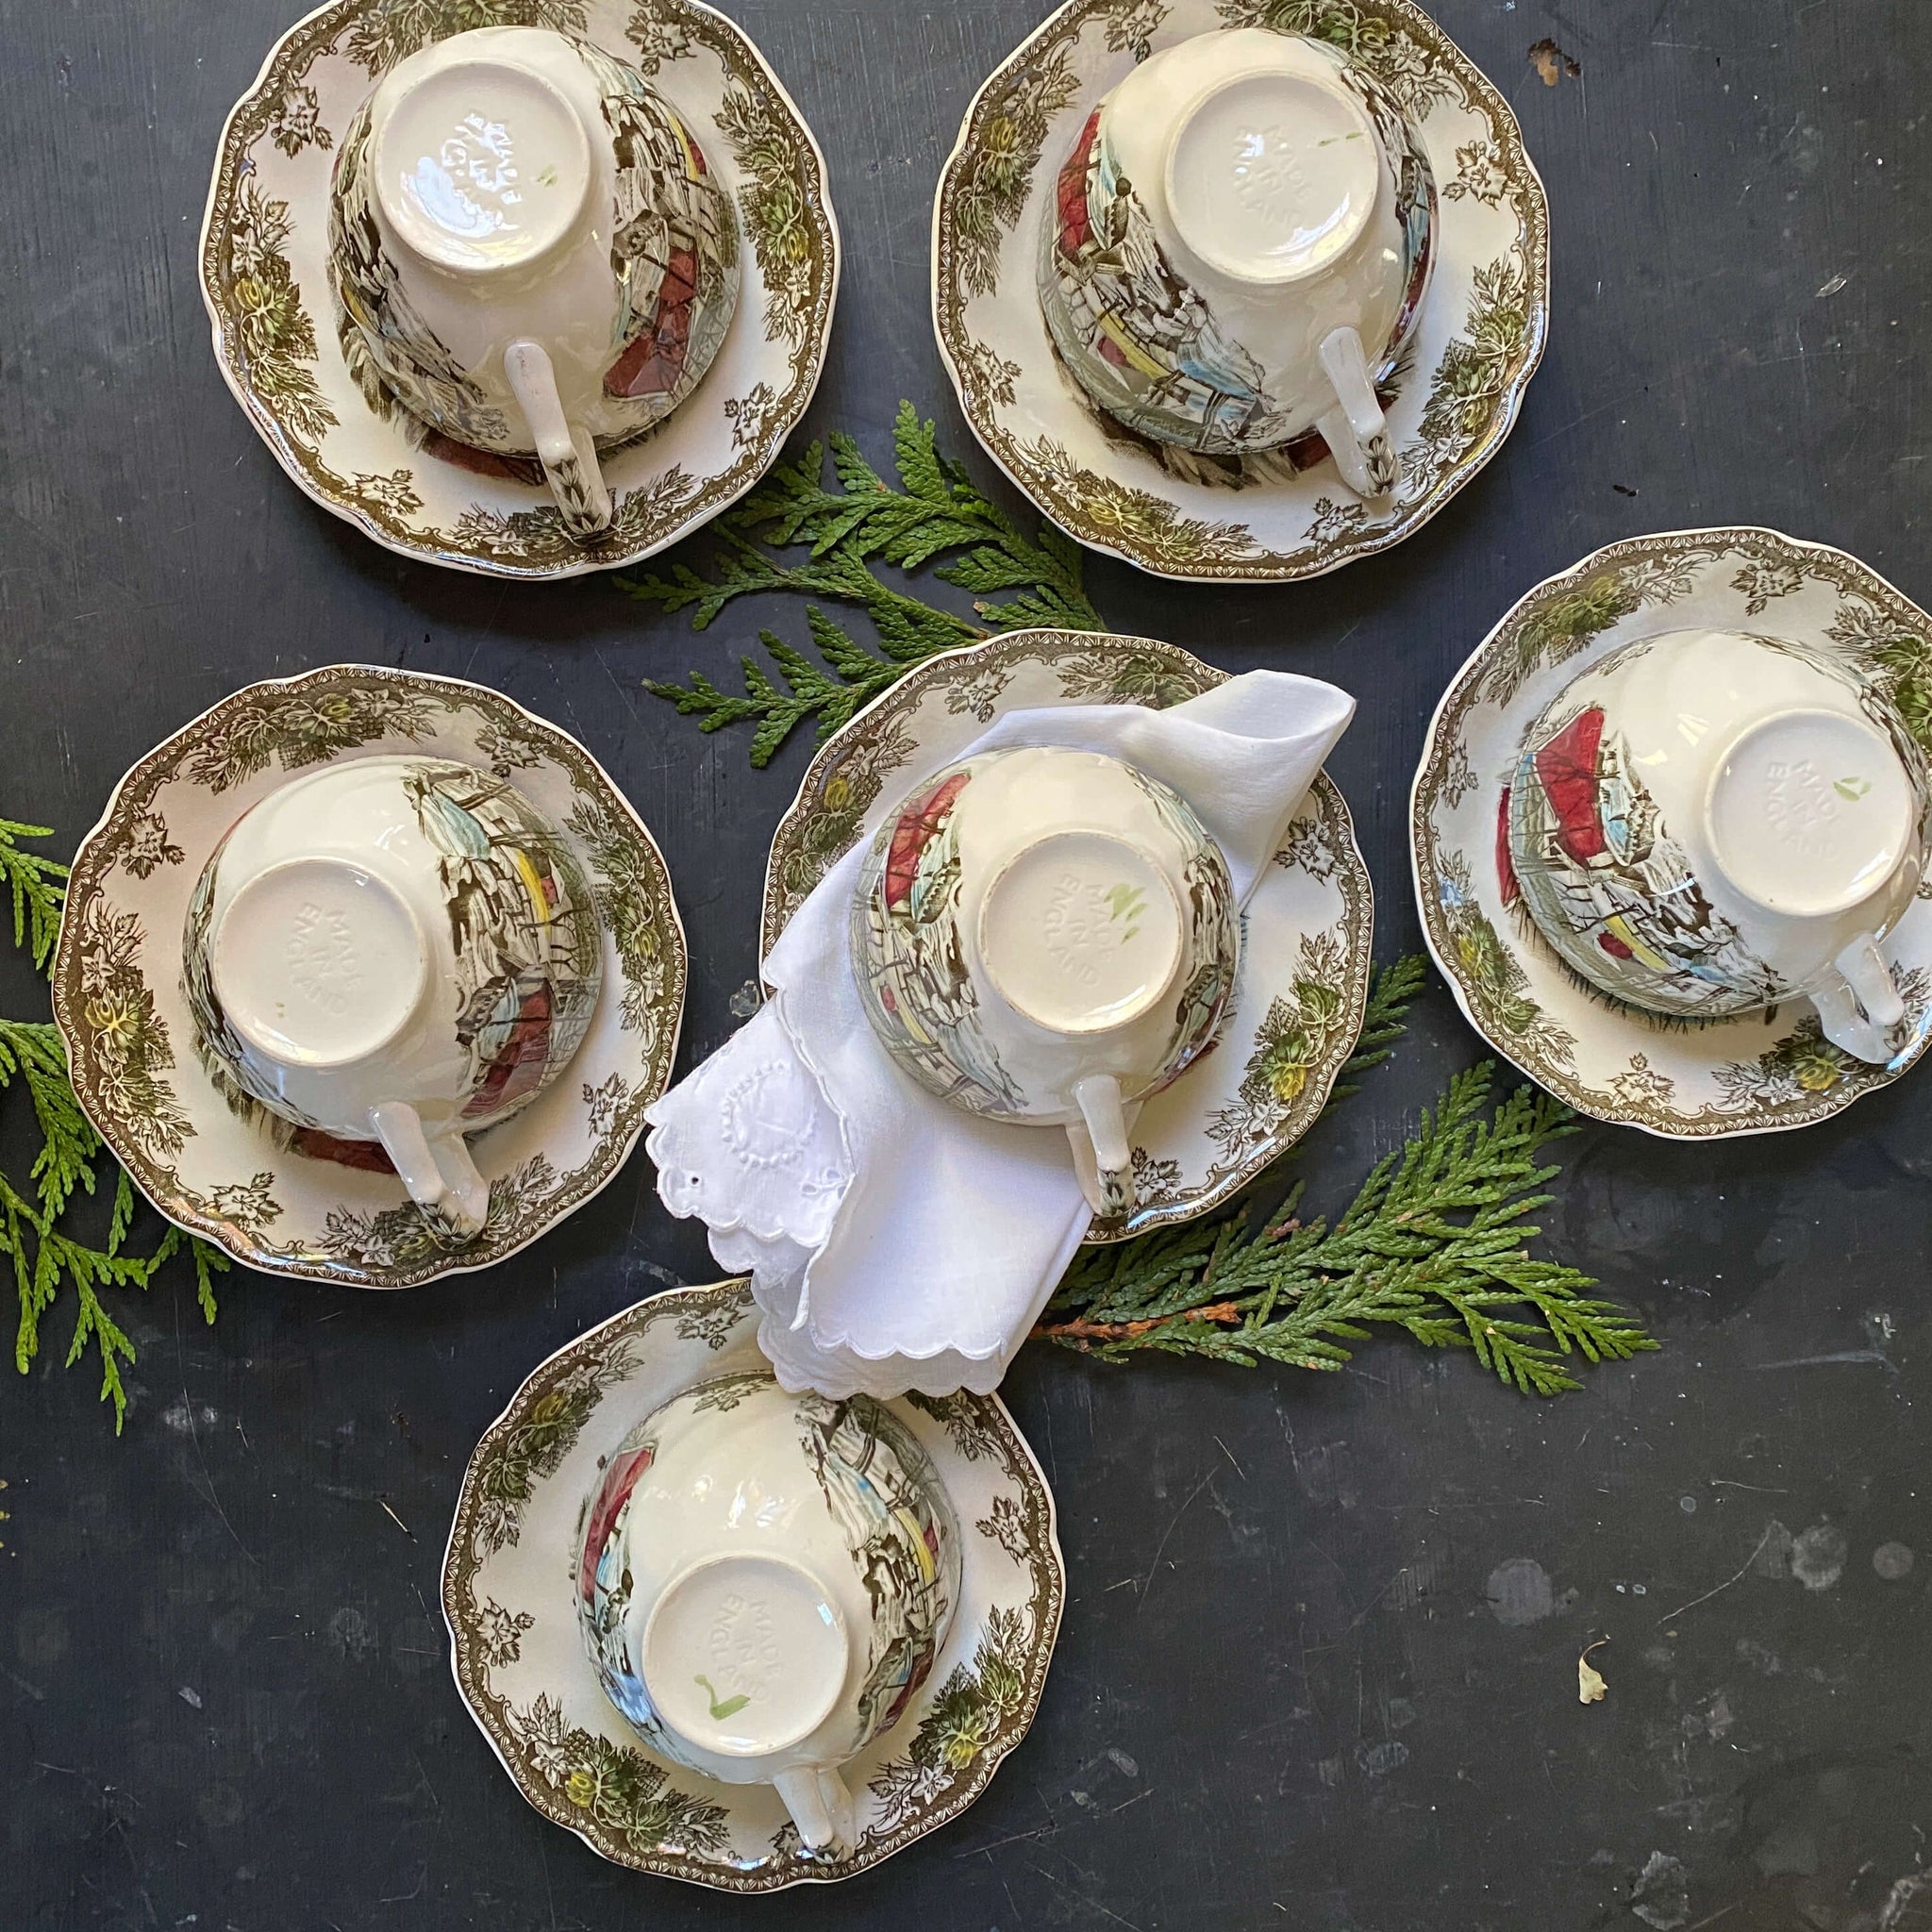 Vintage Friendly Village Ice House Cups & Saucers -  Six Available - Johnson Bros Made in England